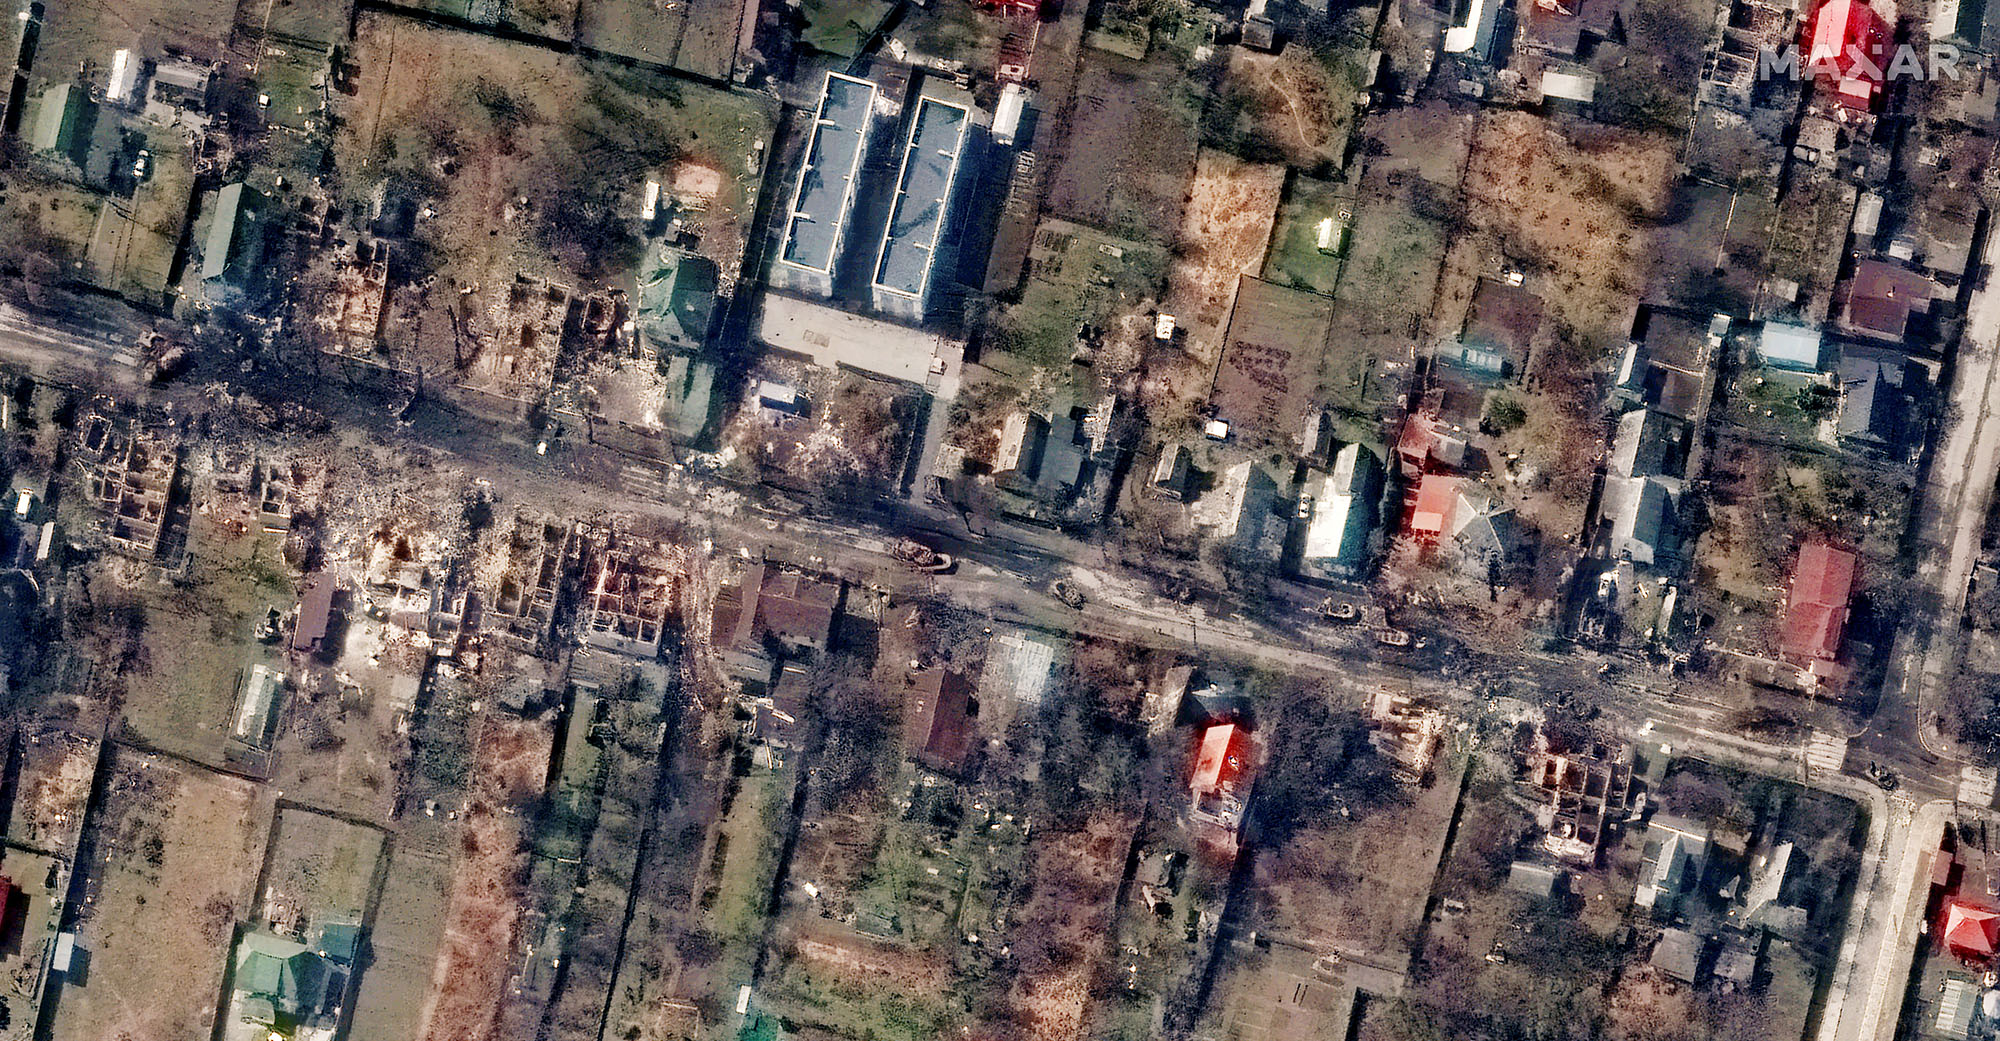 A satellite image shows destroyed homes and armored vehicles along Vokzalna Street, in Bucha, Ukraine, on March 31.